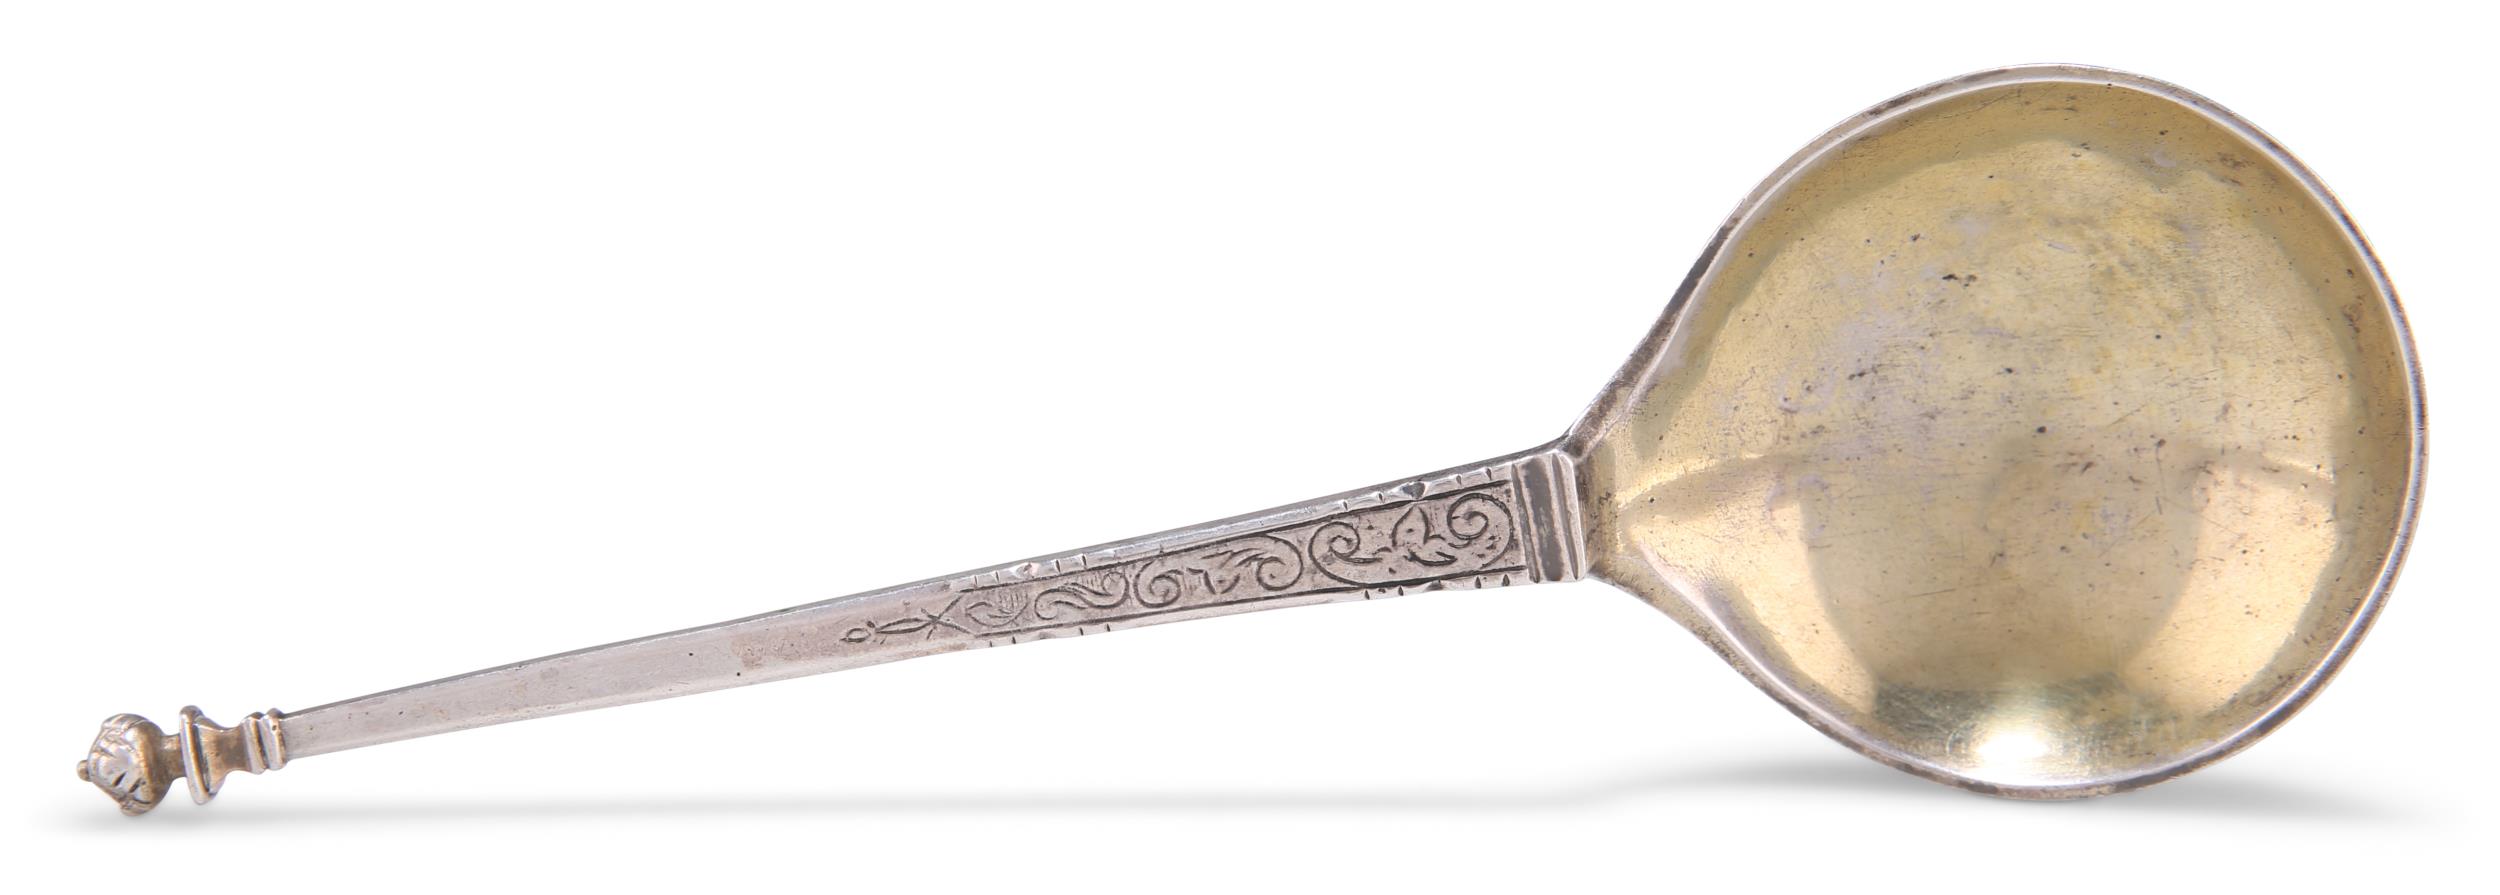 A NORTHERN EUROPEAN SILVER SPOON, LATE 17TH/EARLY 18TH CENTURY